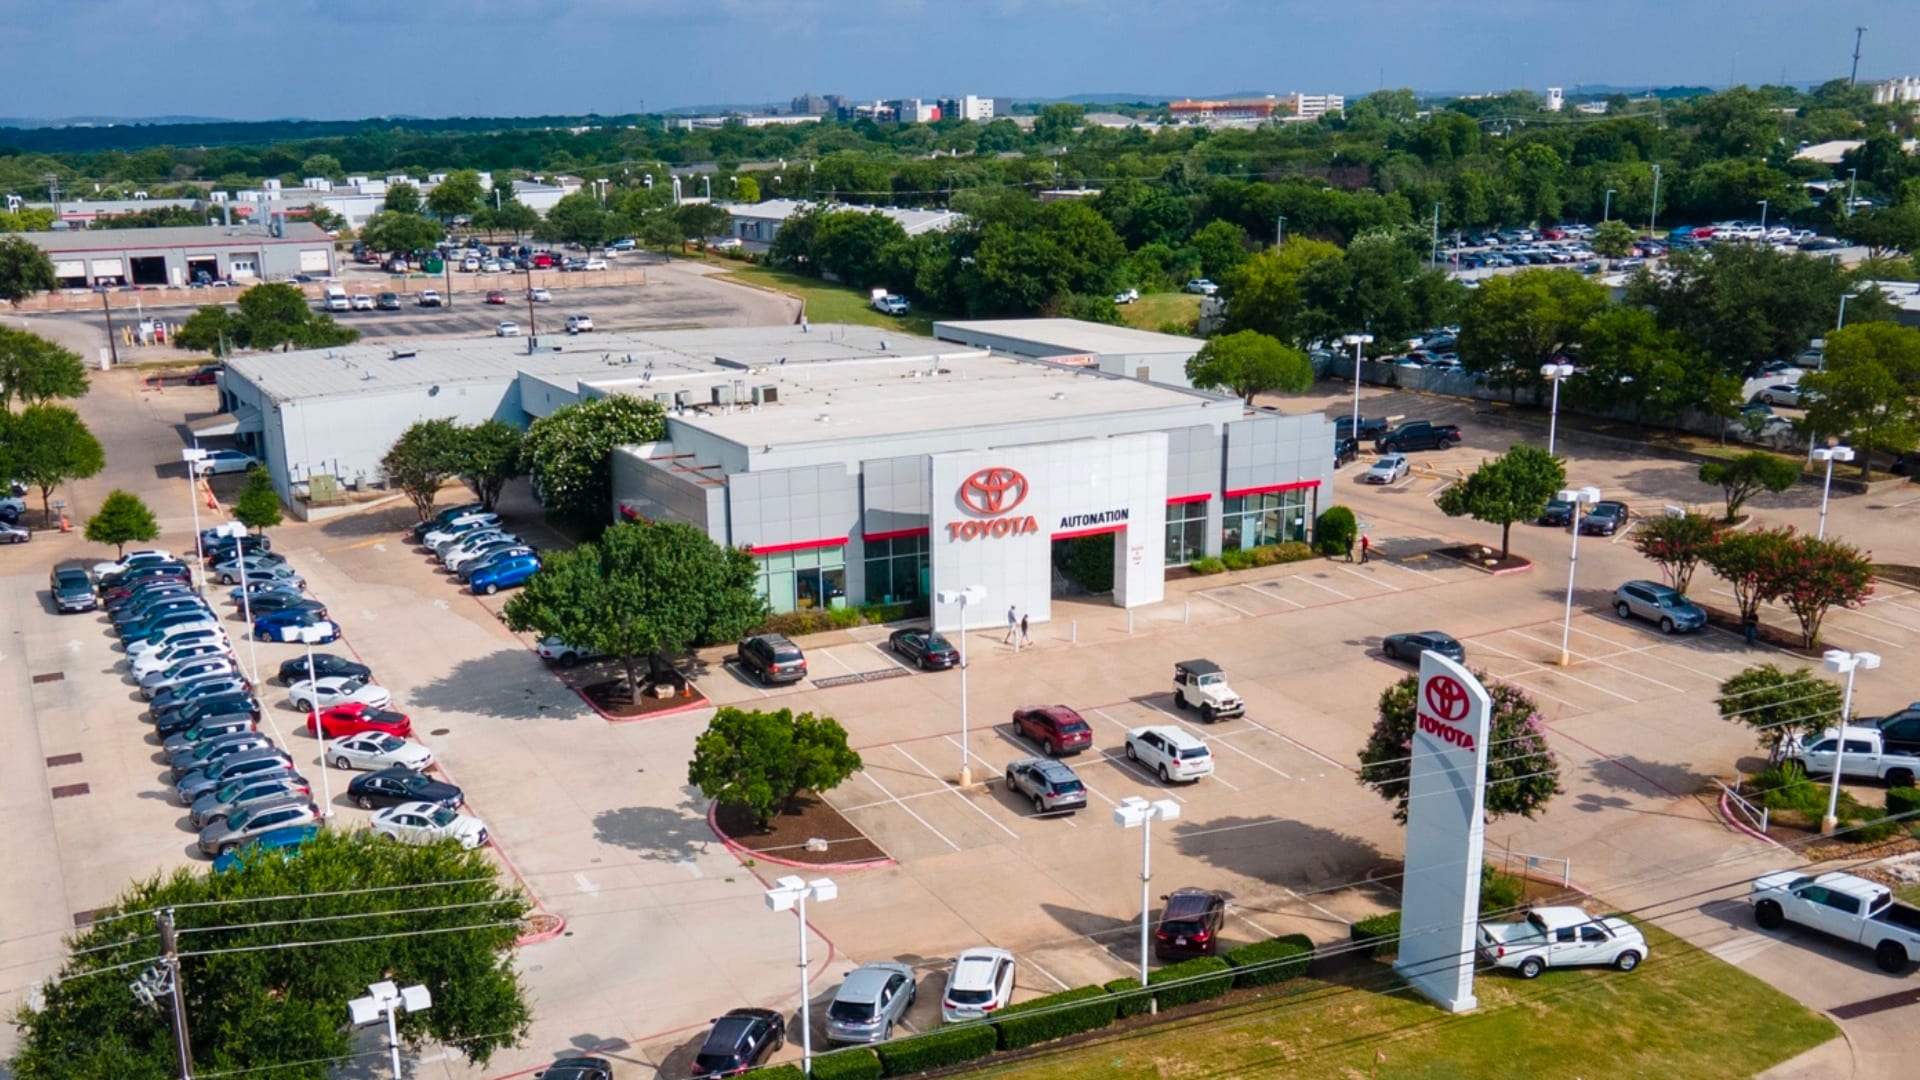 Overhead exterior view of AutoNation Toyota South Austin. The building is grey and white and has some large windows. Many vehicles are seen parked in rows near the building, which also has many trees nearby.